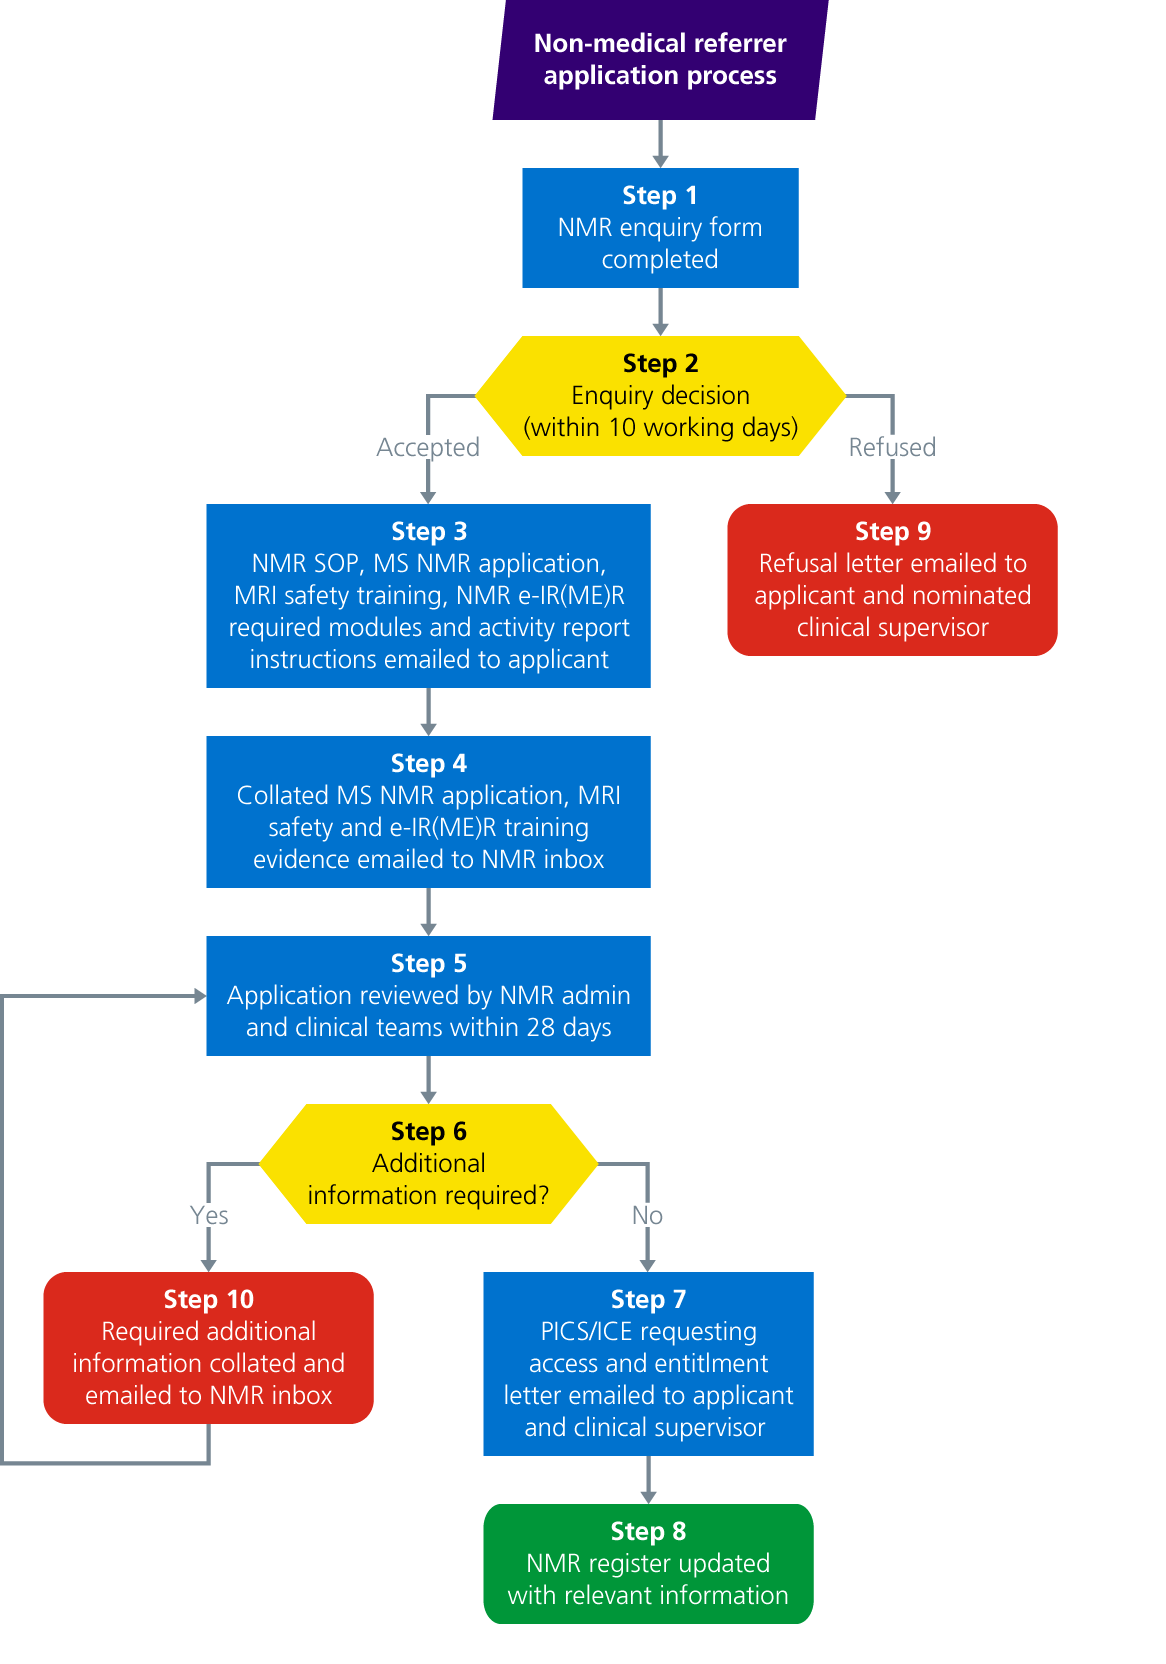 Figure 1: flowchart displaying the application process for non-medical referrers